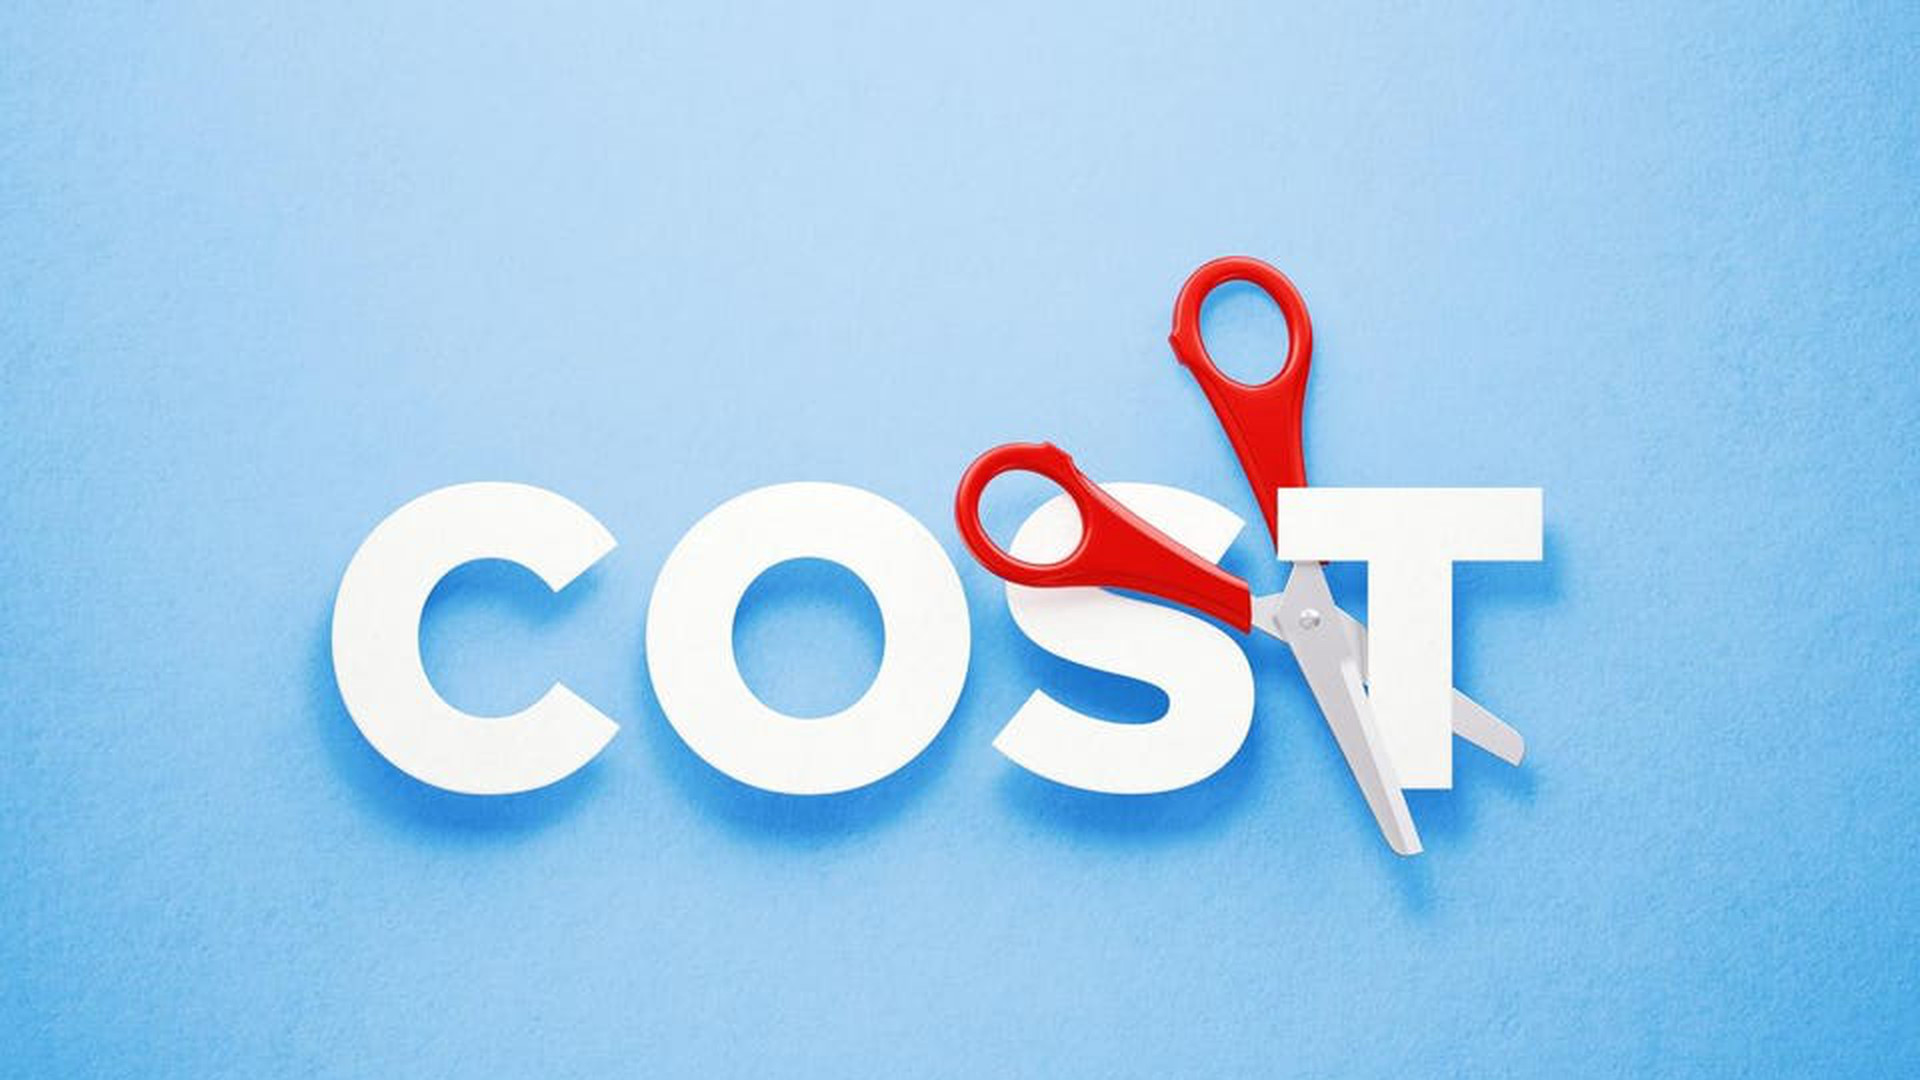 5 ChatGPT Prompts To Reduce Your Costs And Make More Profit